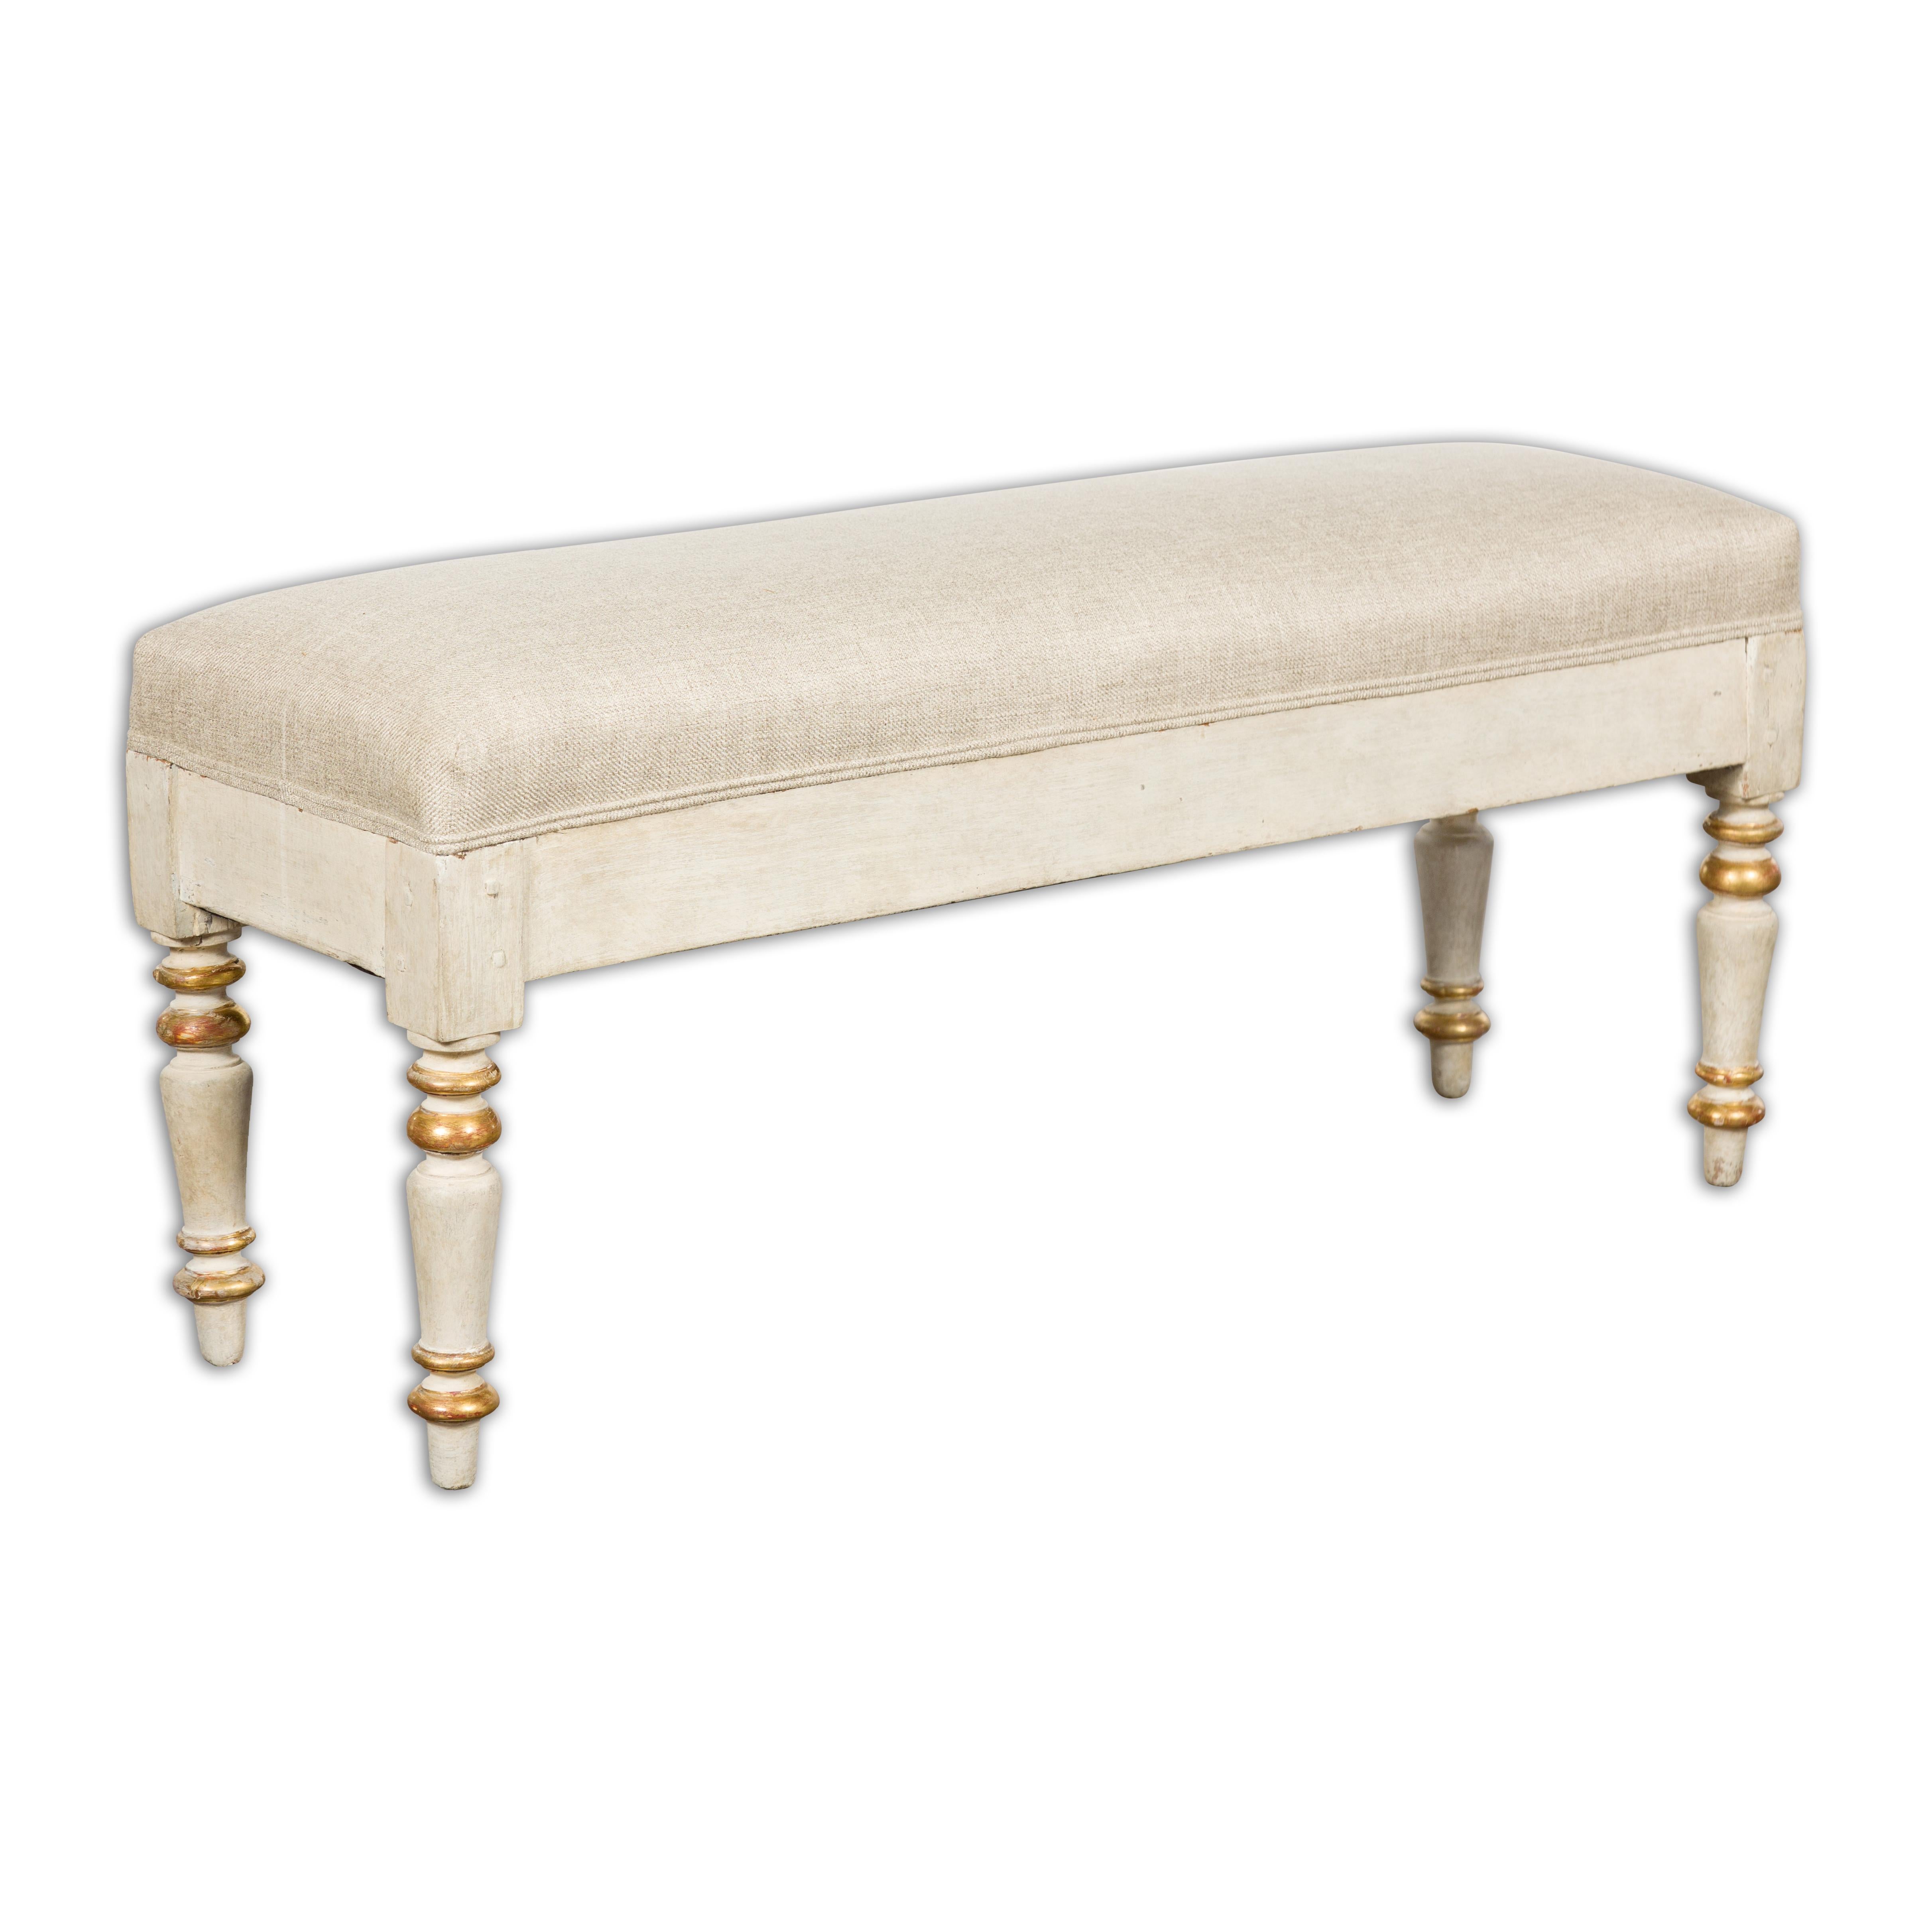 19th Century French Painted and Gilded Bench with Turned Legs and Upholstery For Sale 12